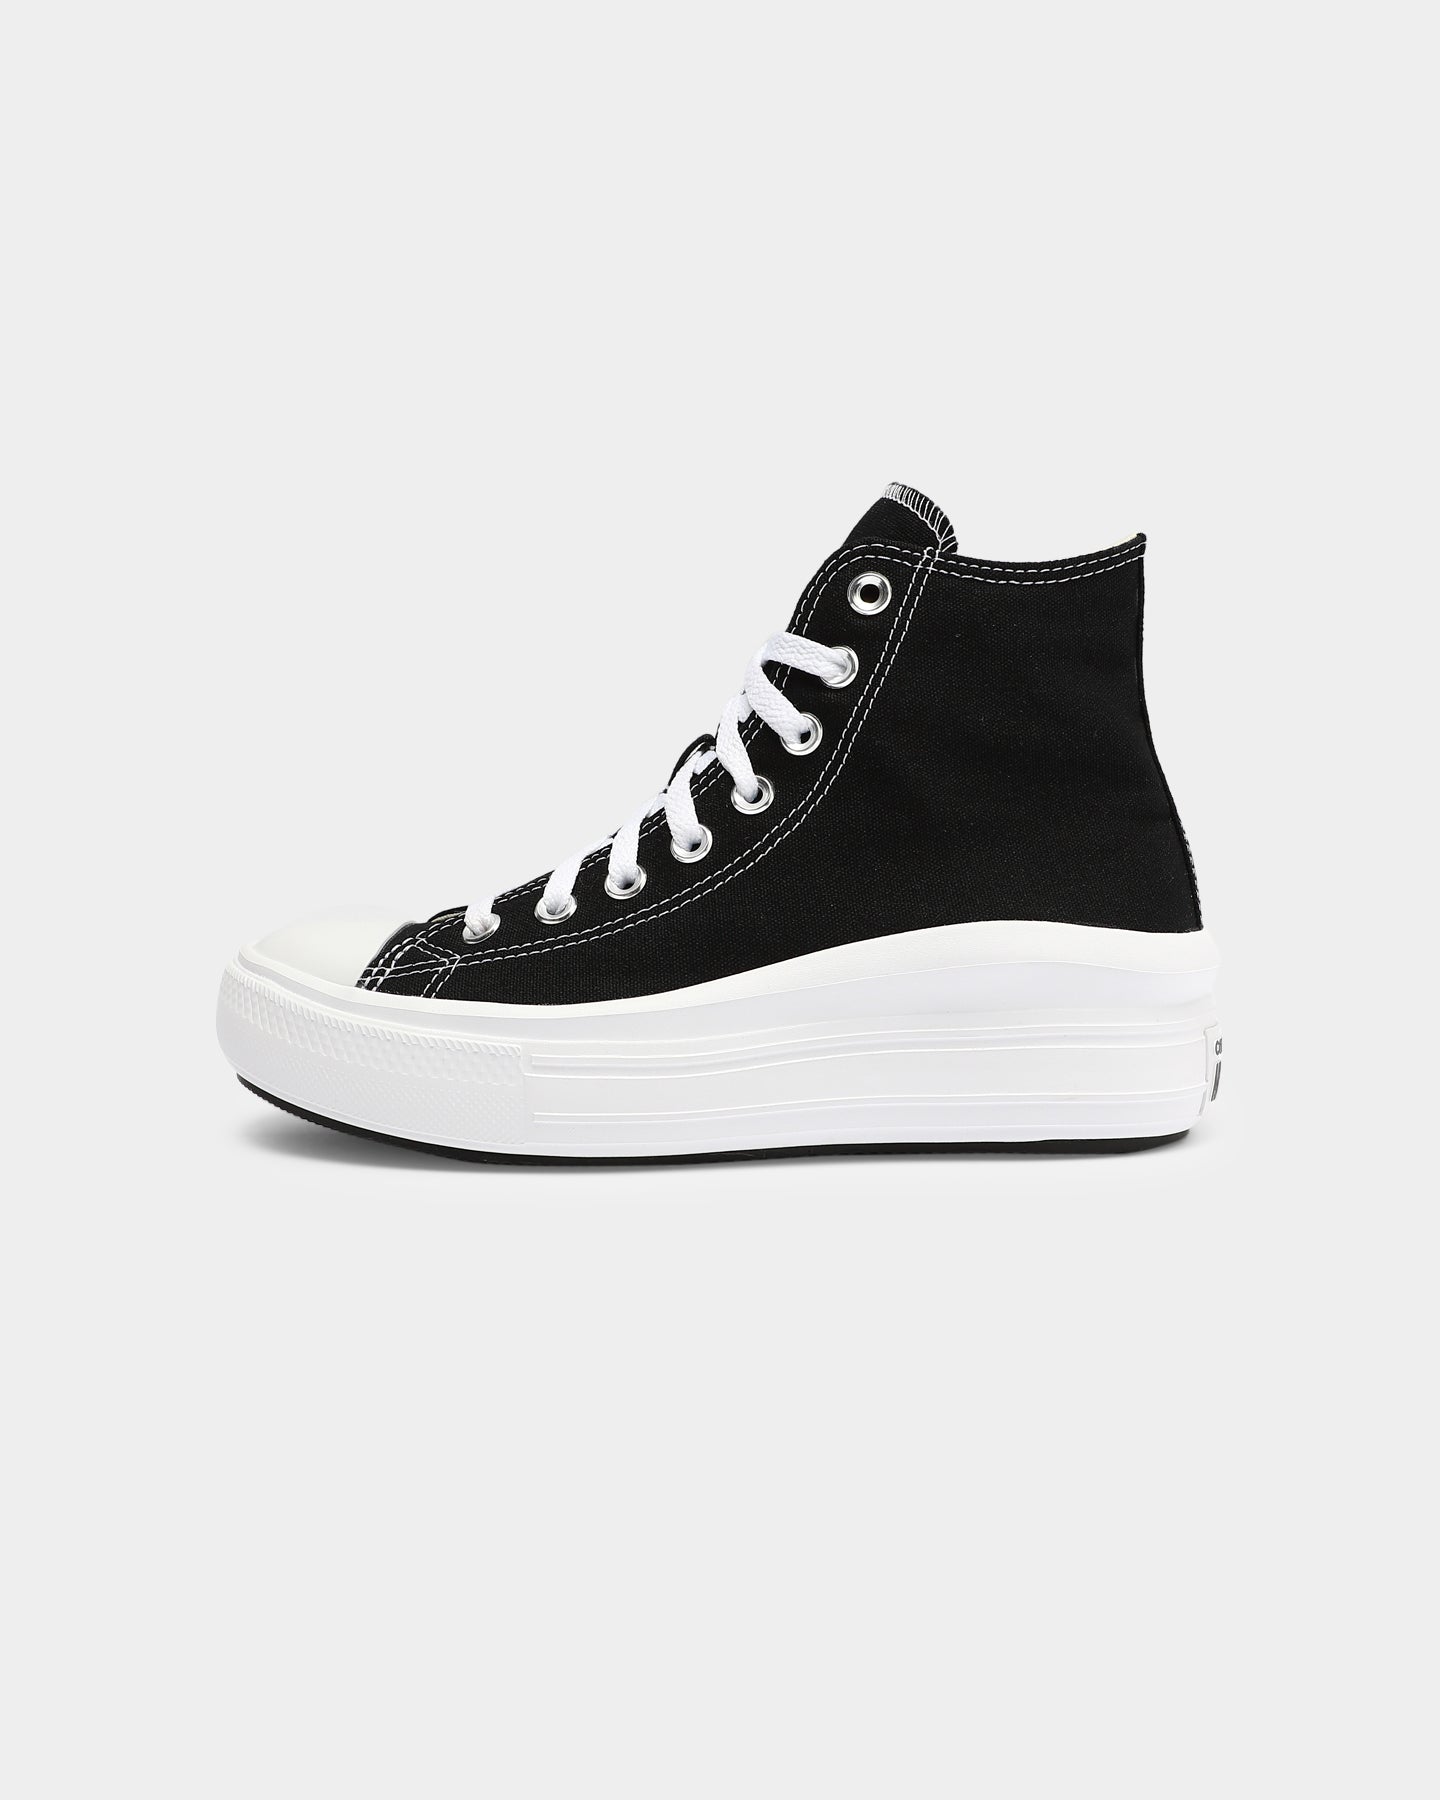 high top black and white converse